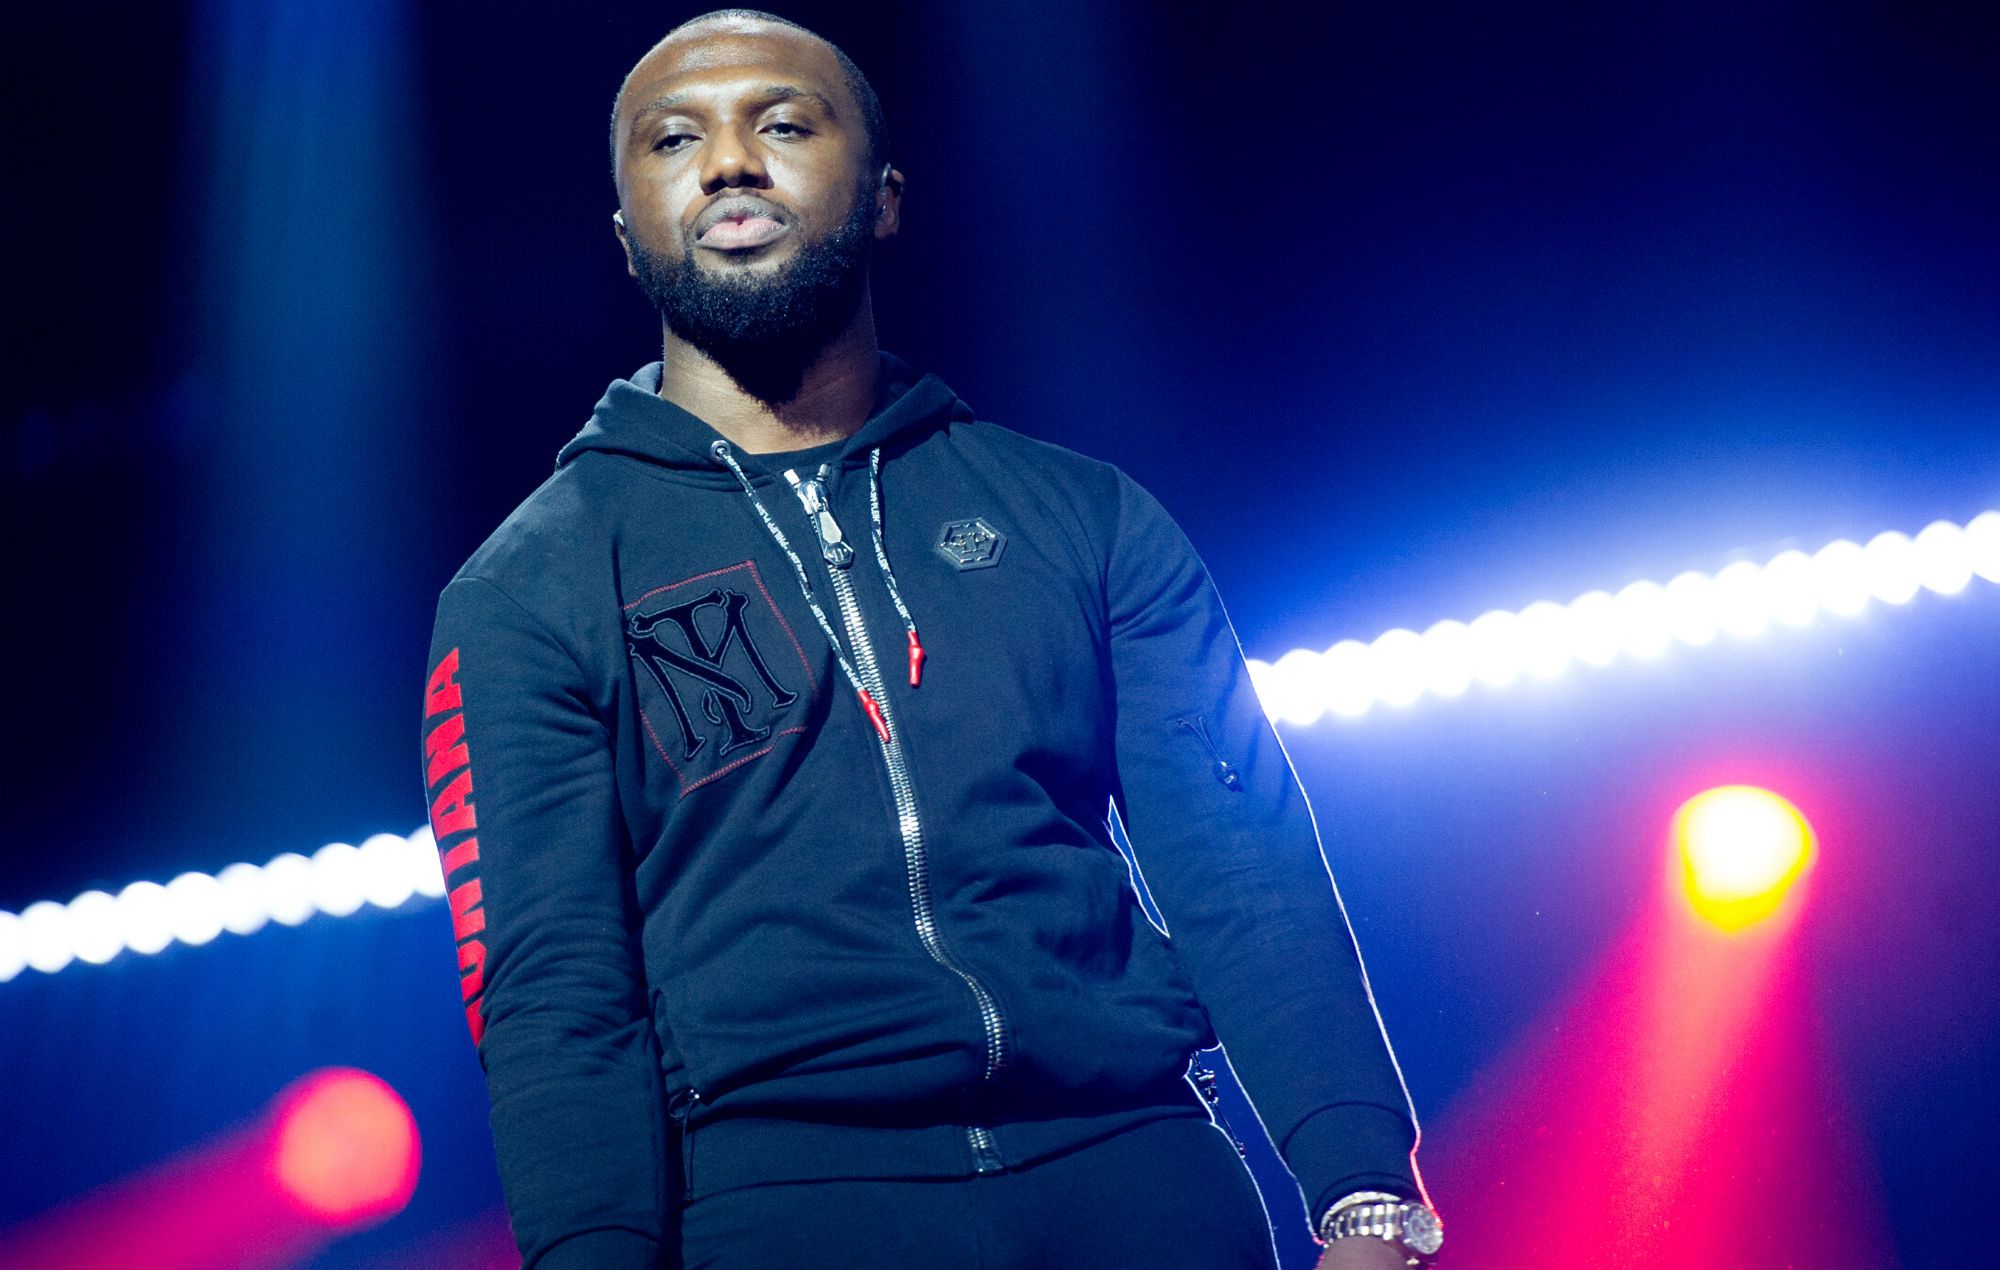 Headie One has been sentenced to six months in prison